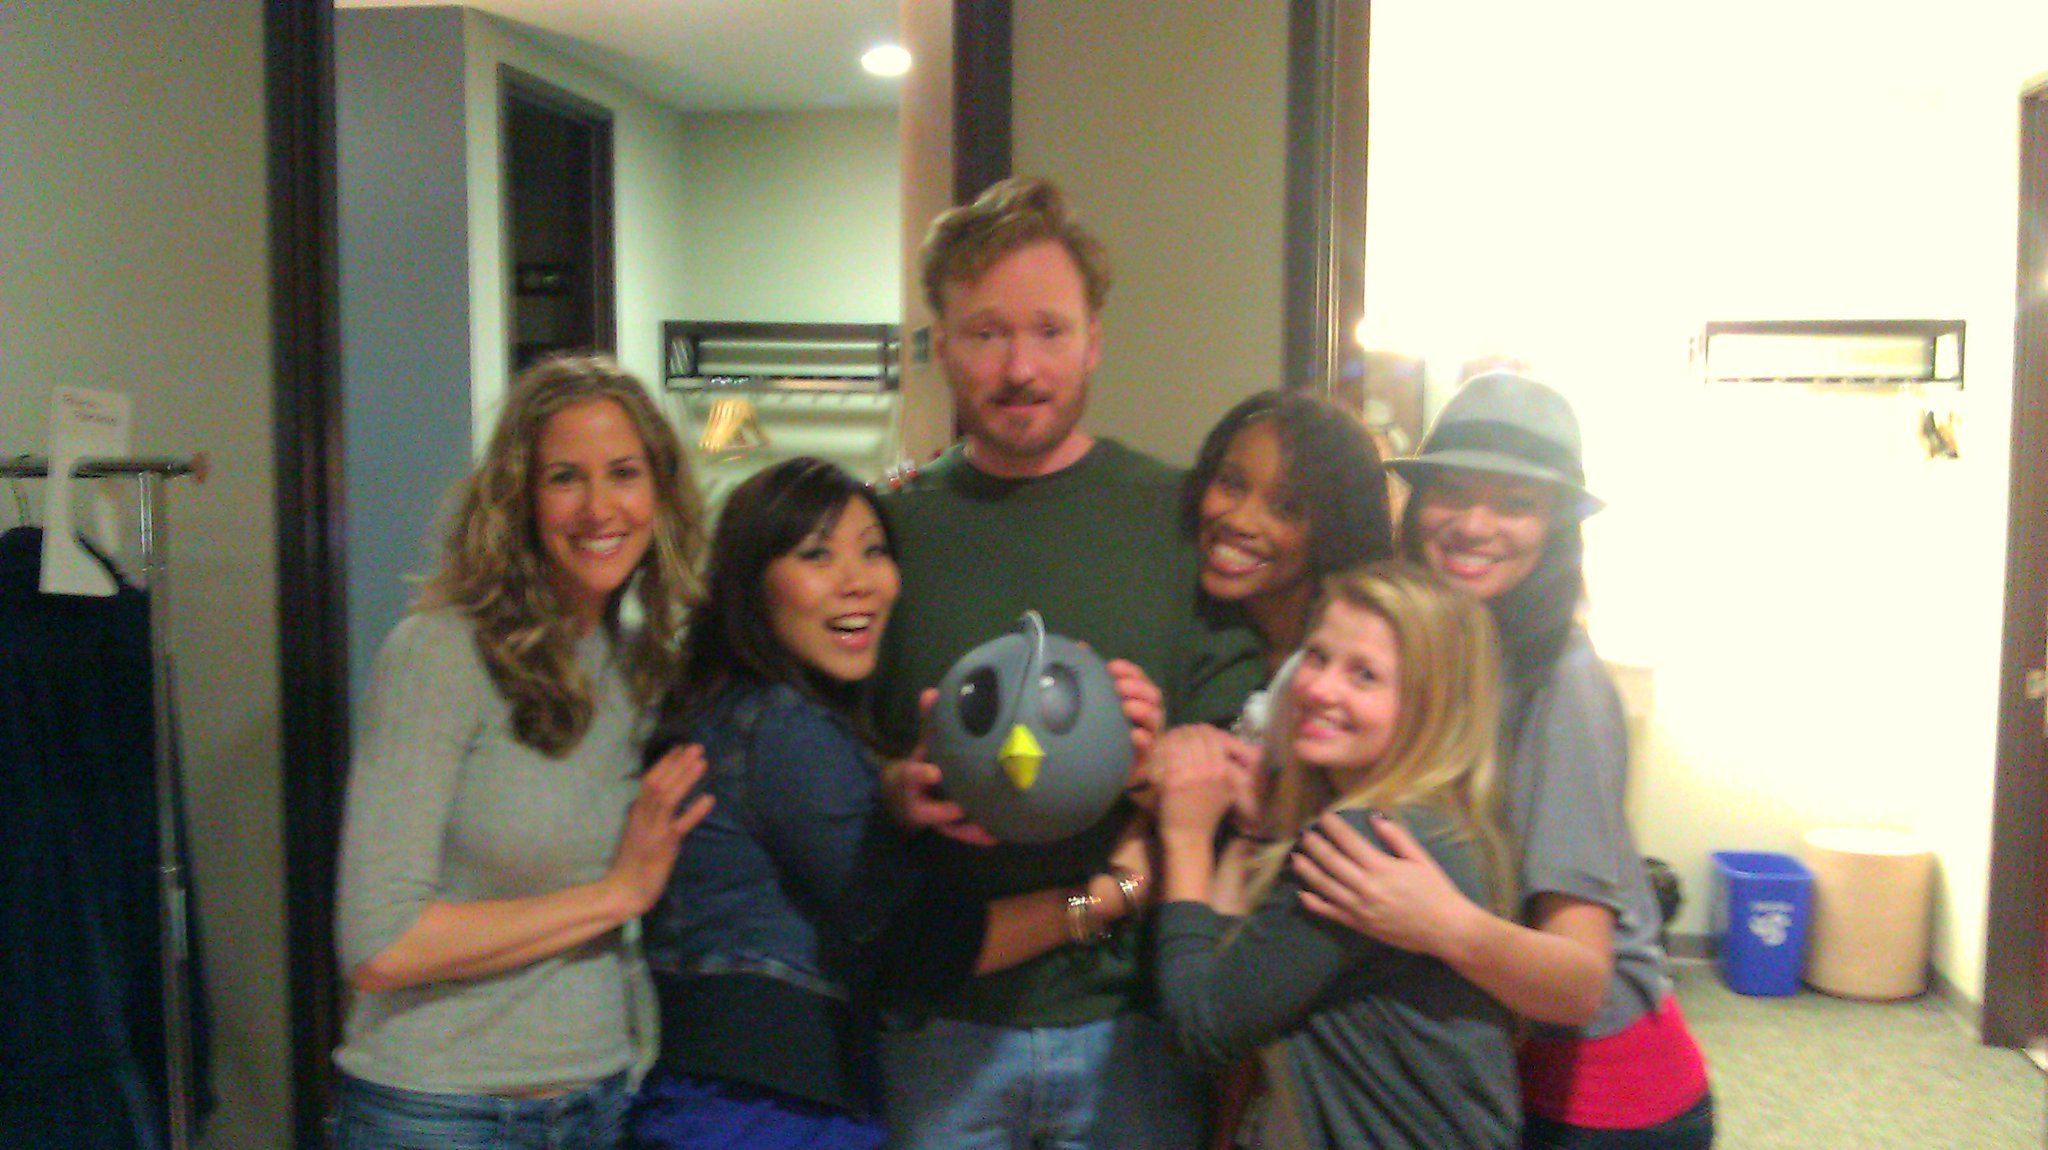 Sketch group, Boom Chick Boom, with Conan!